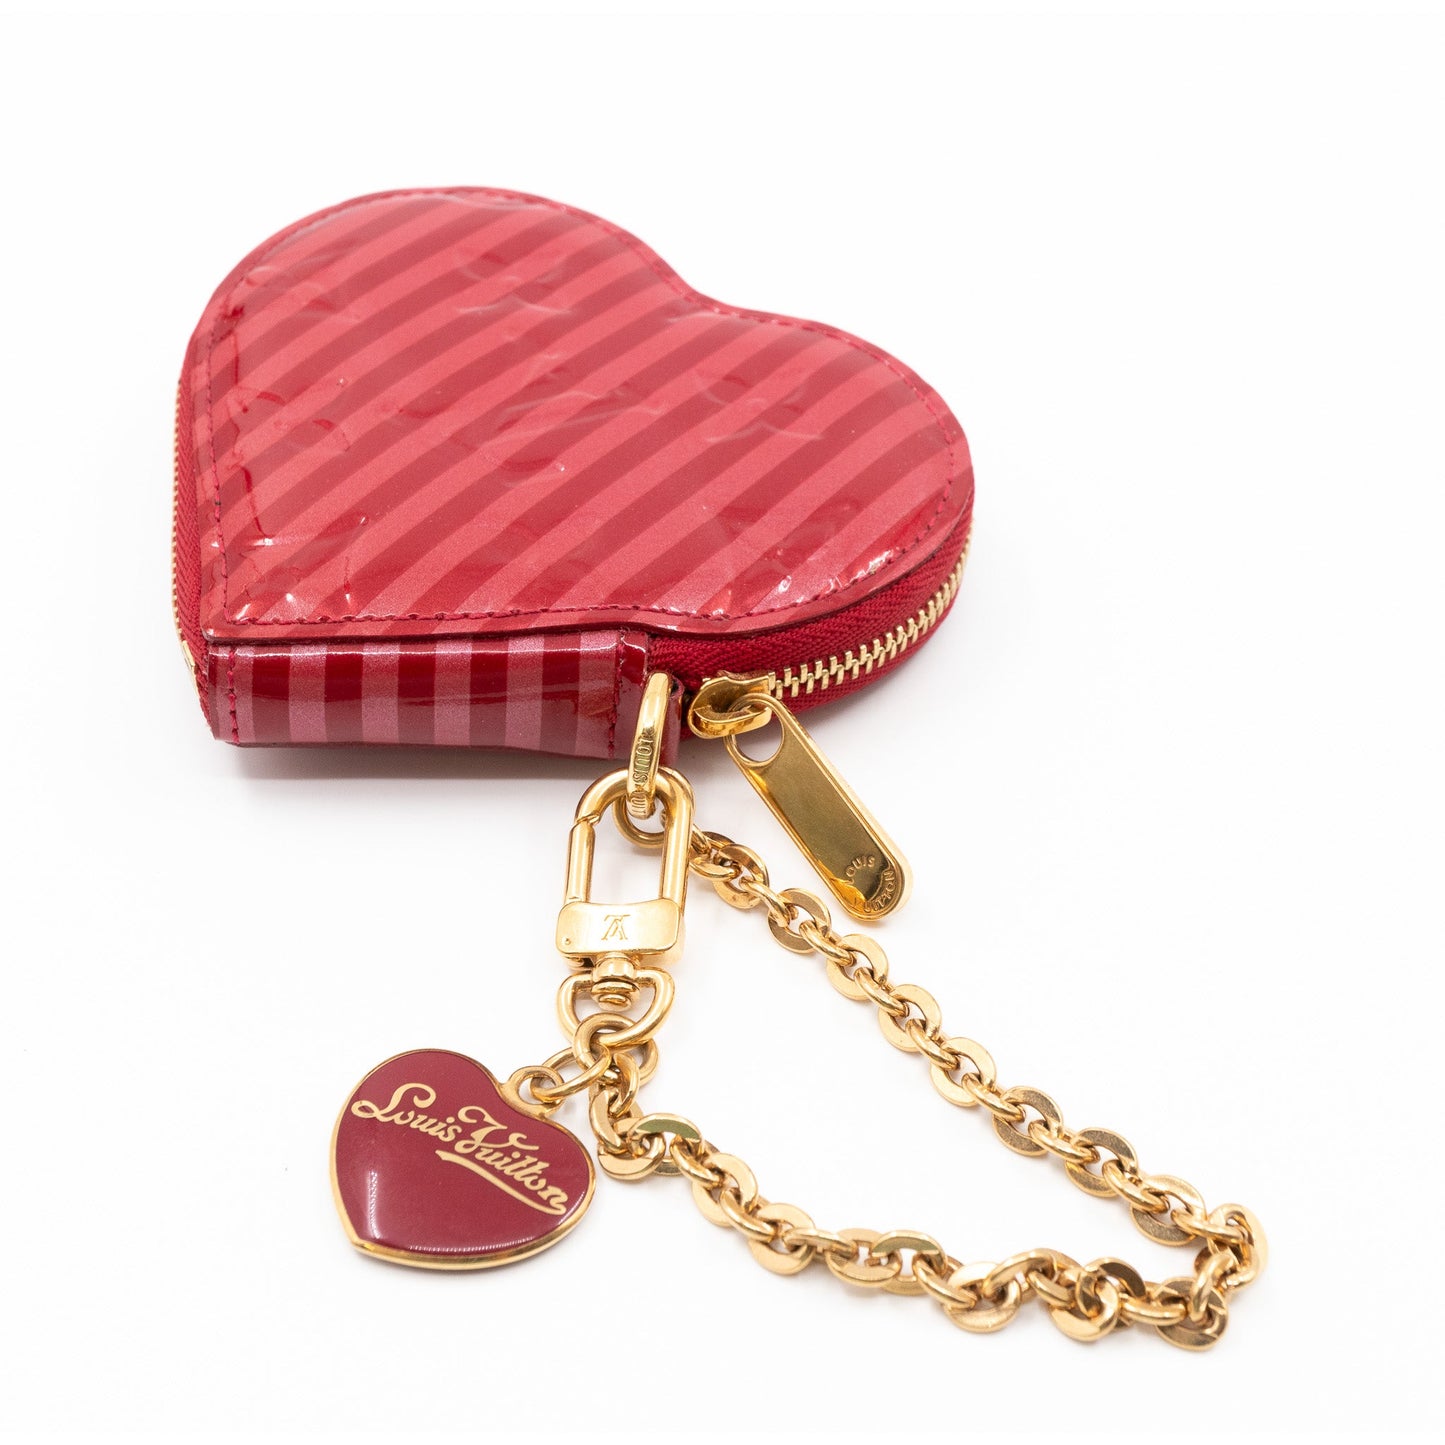 Louis Vuitton Red Pomme d'Amour Monogram Rayures Vernis Heart Coin Purse  QJA09SEARB000